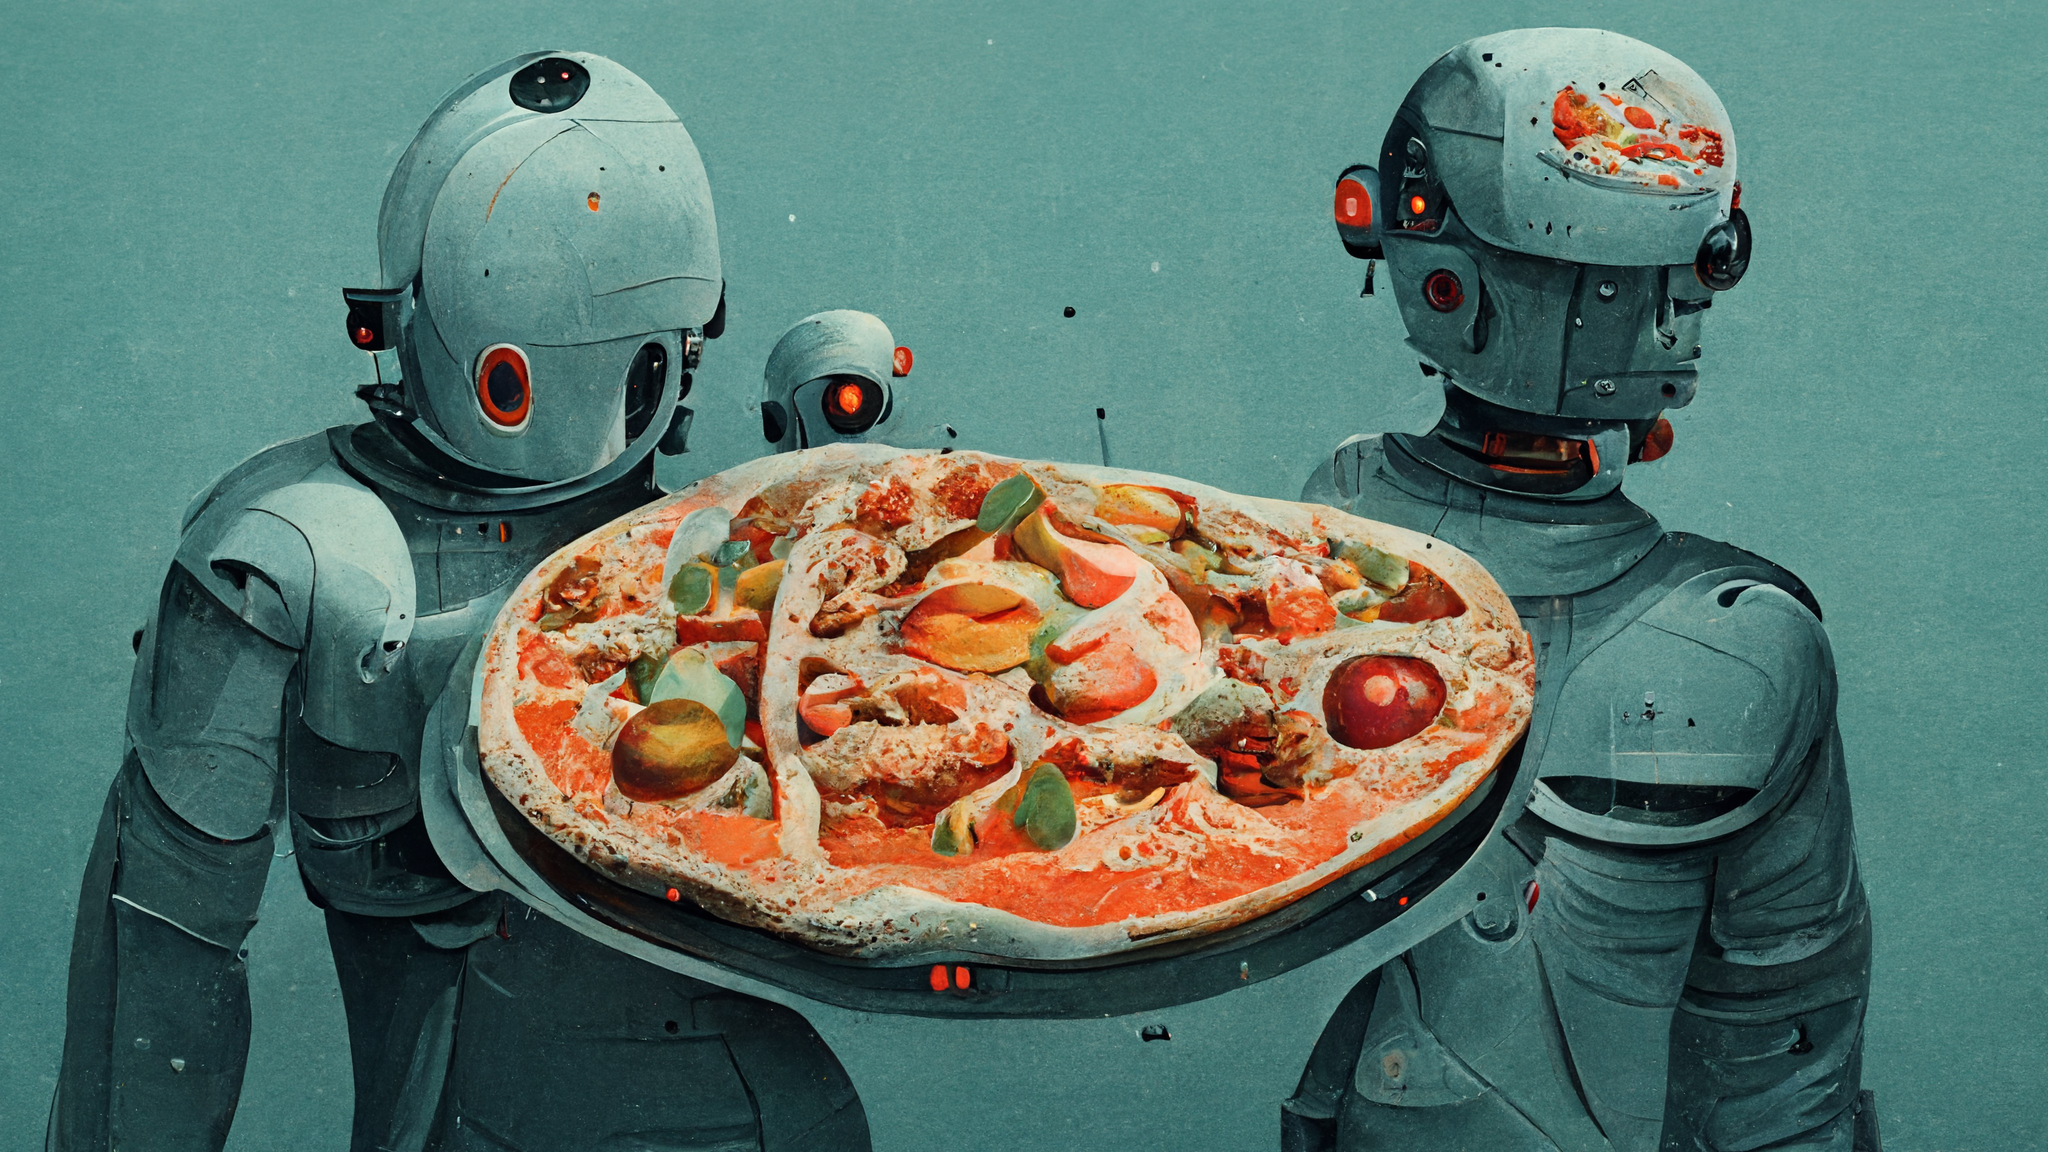 IV. The Advancements in Pizza Delivery through Drones